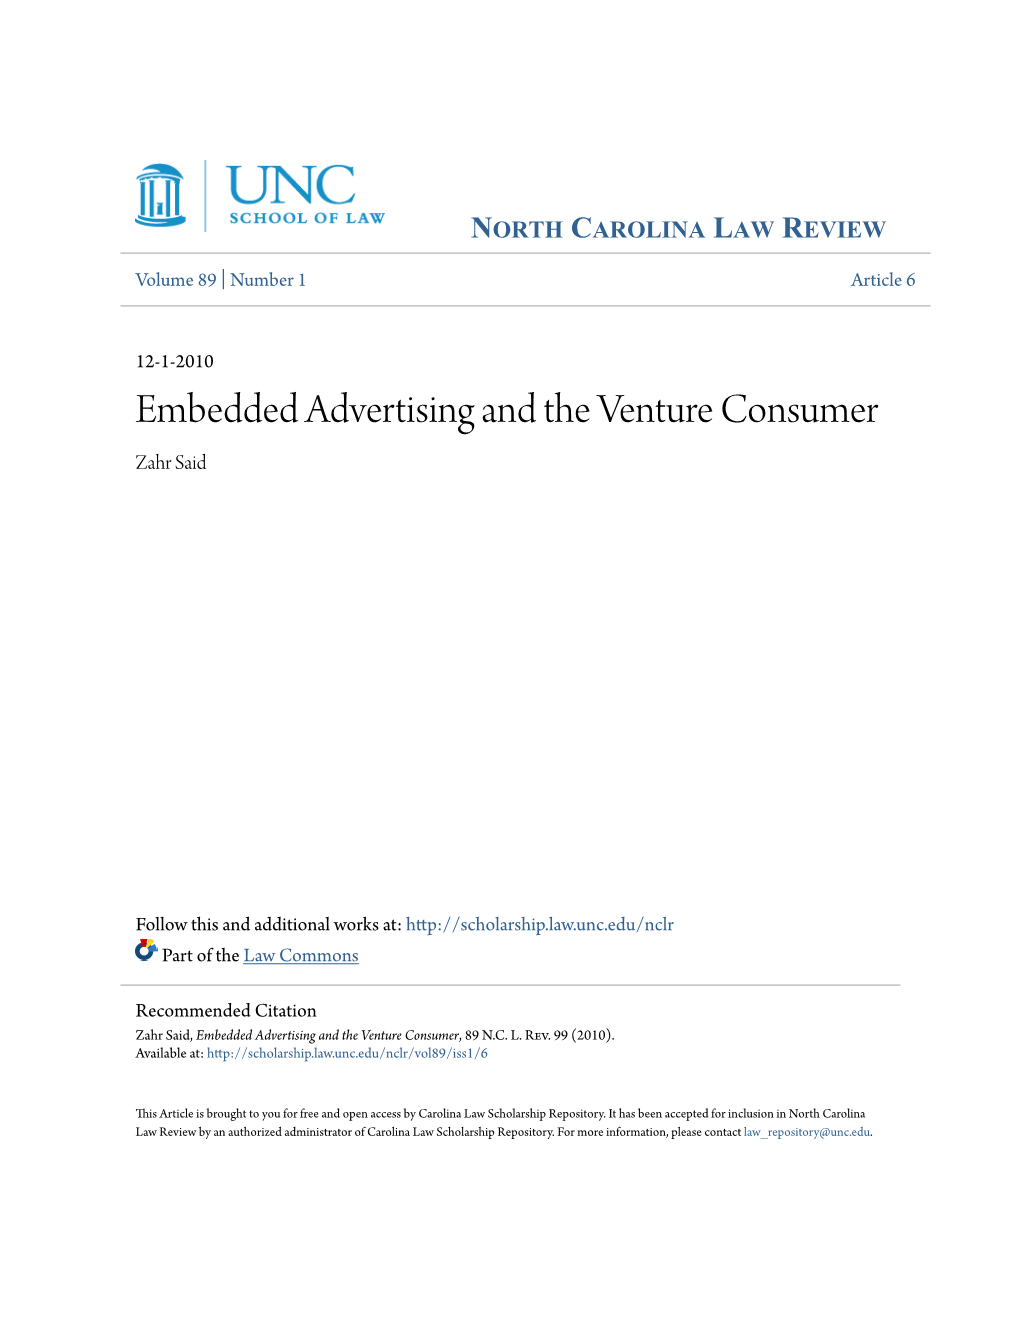 Embedded Advertising and the Venture Consumer Zahr Said